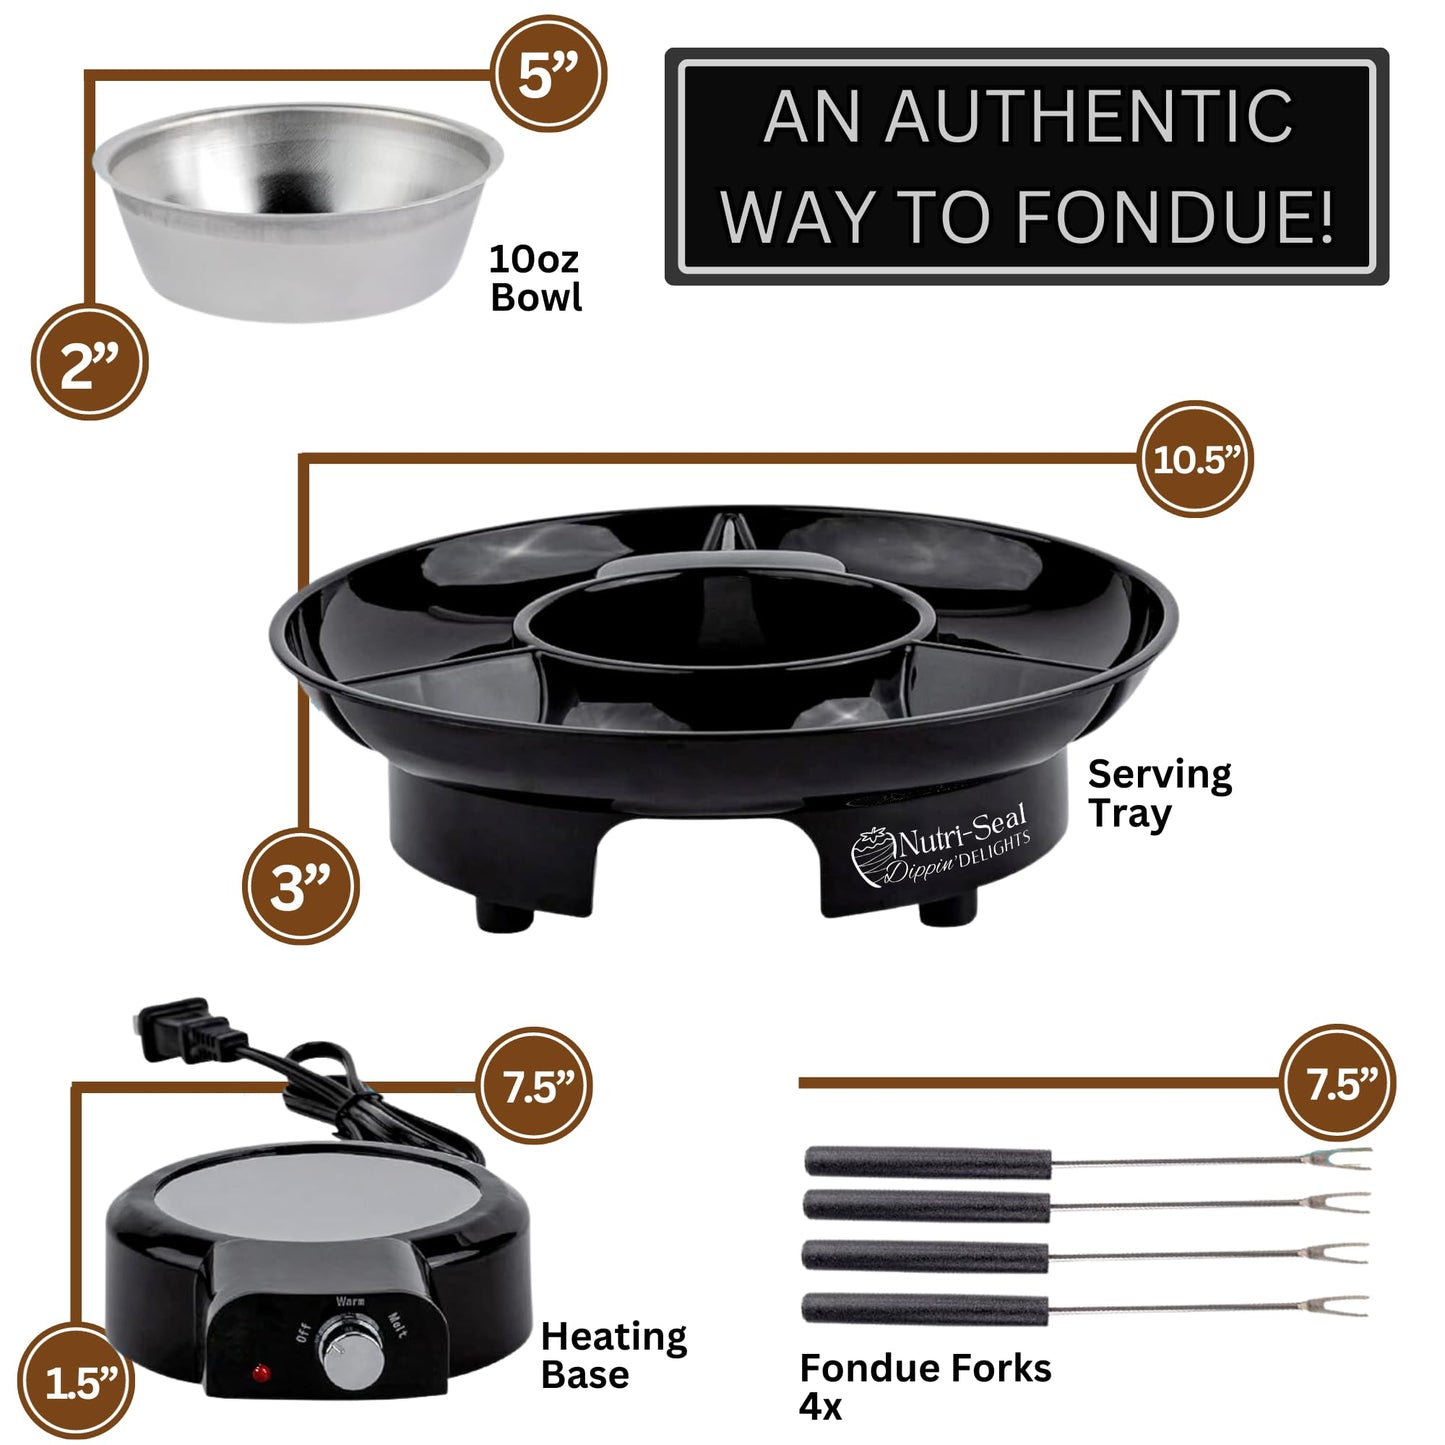 Dippin' Delights Premium Fondue Pot Electric Set - Perfect Chocolate Fondue Set for Parties, Gifting, and Date Night -Easy to Use & Clean - Detachable Tray w/4 Roasting Forks - Electric Fondue Pot Set